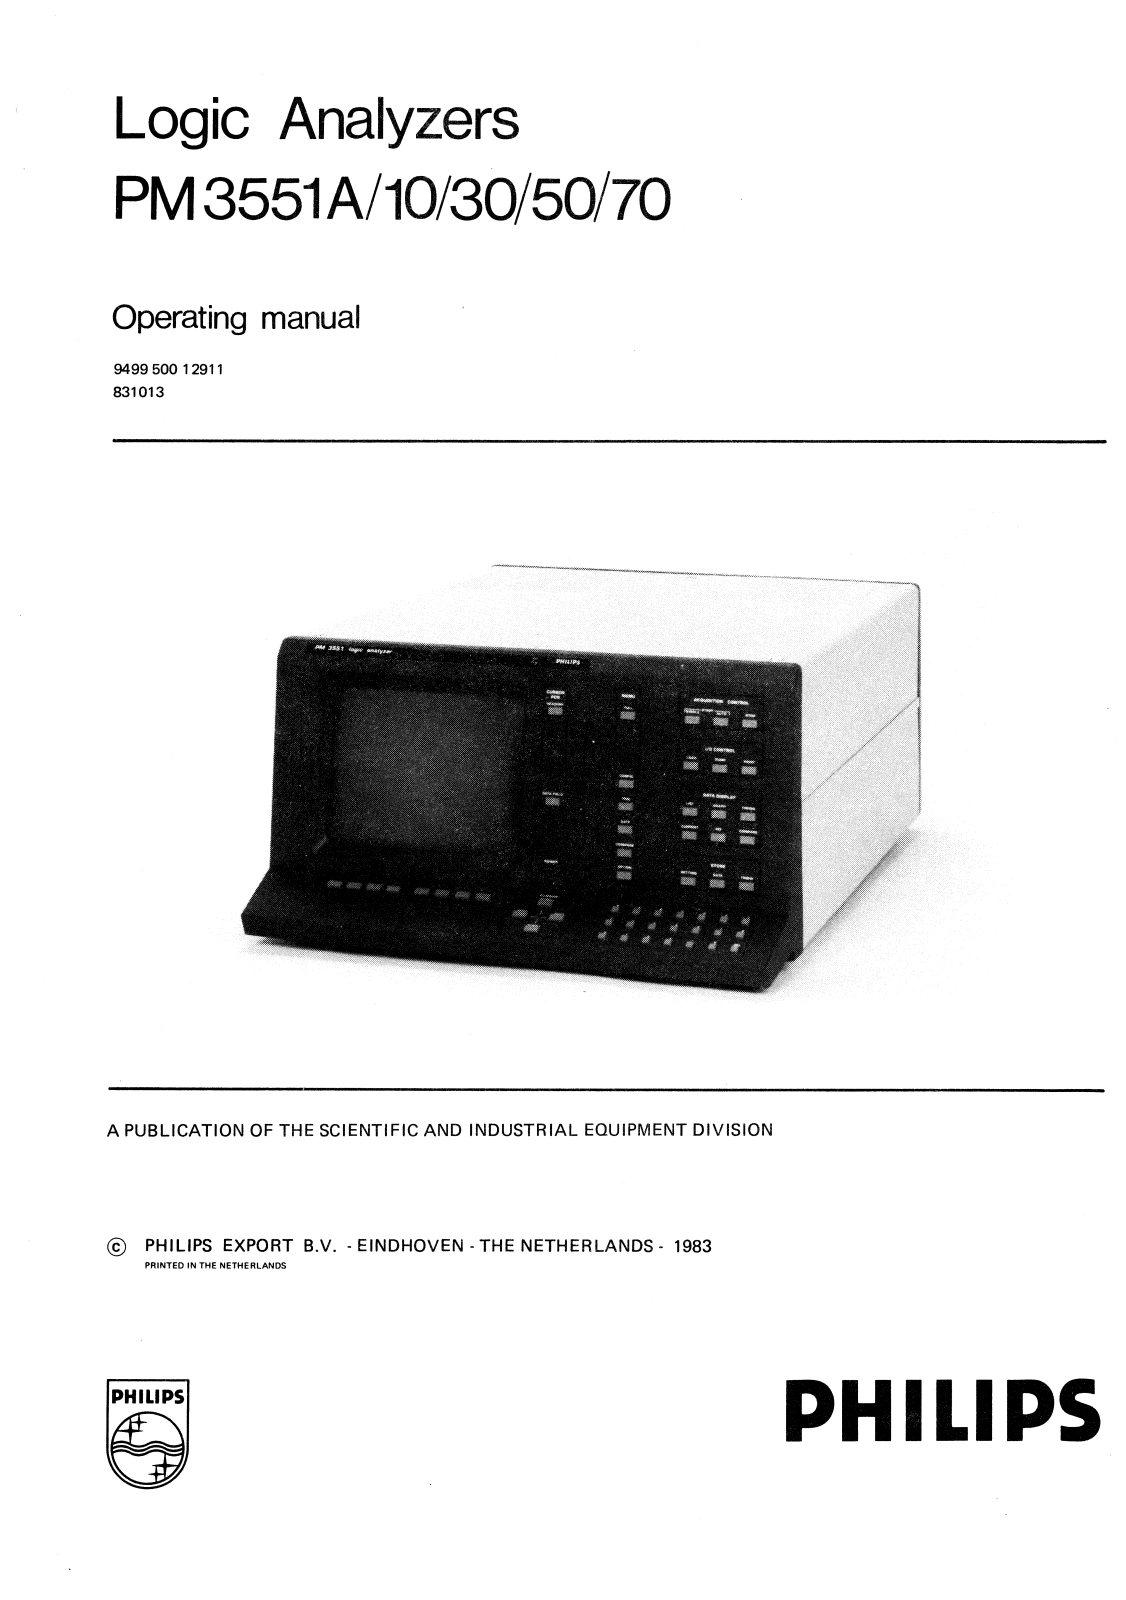 Philips PM3551A User Manual